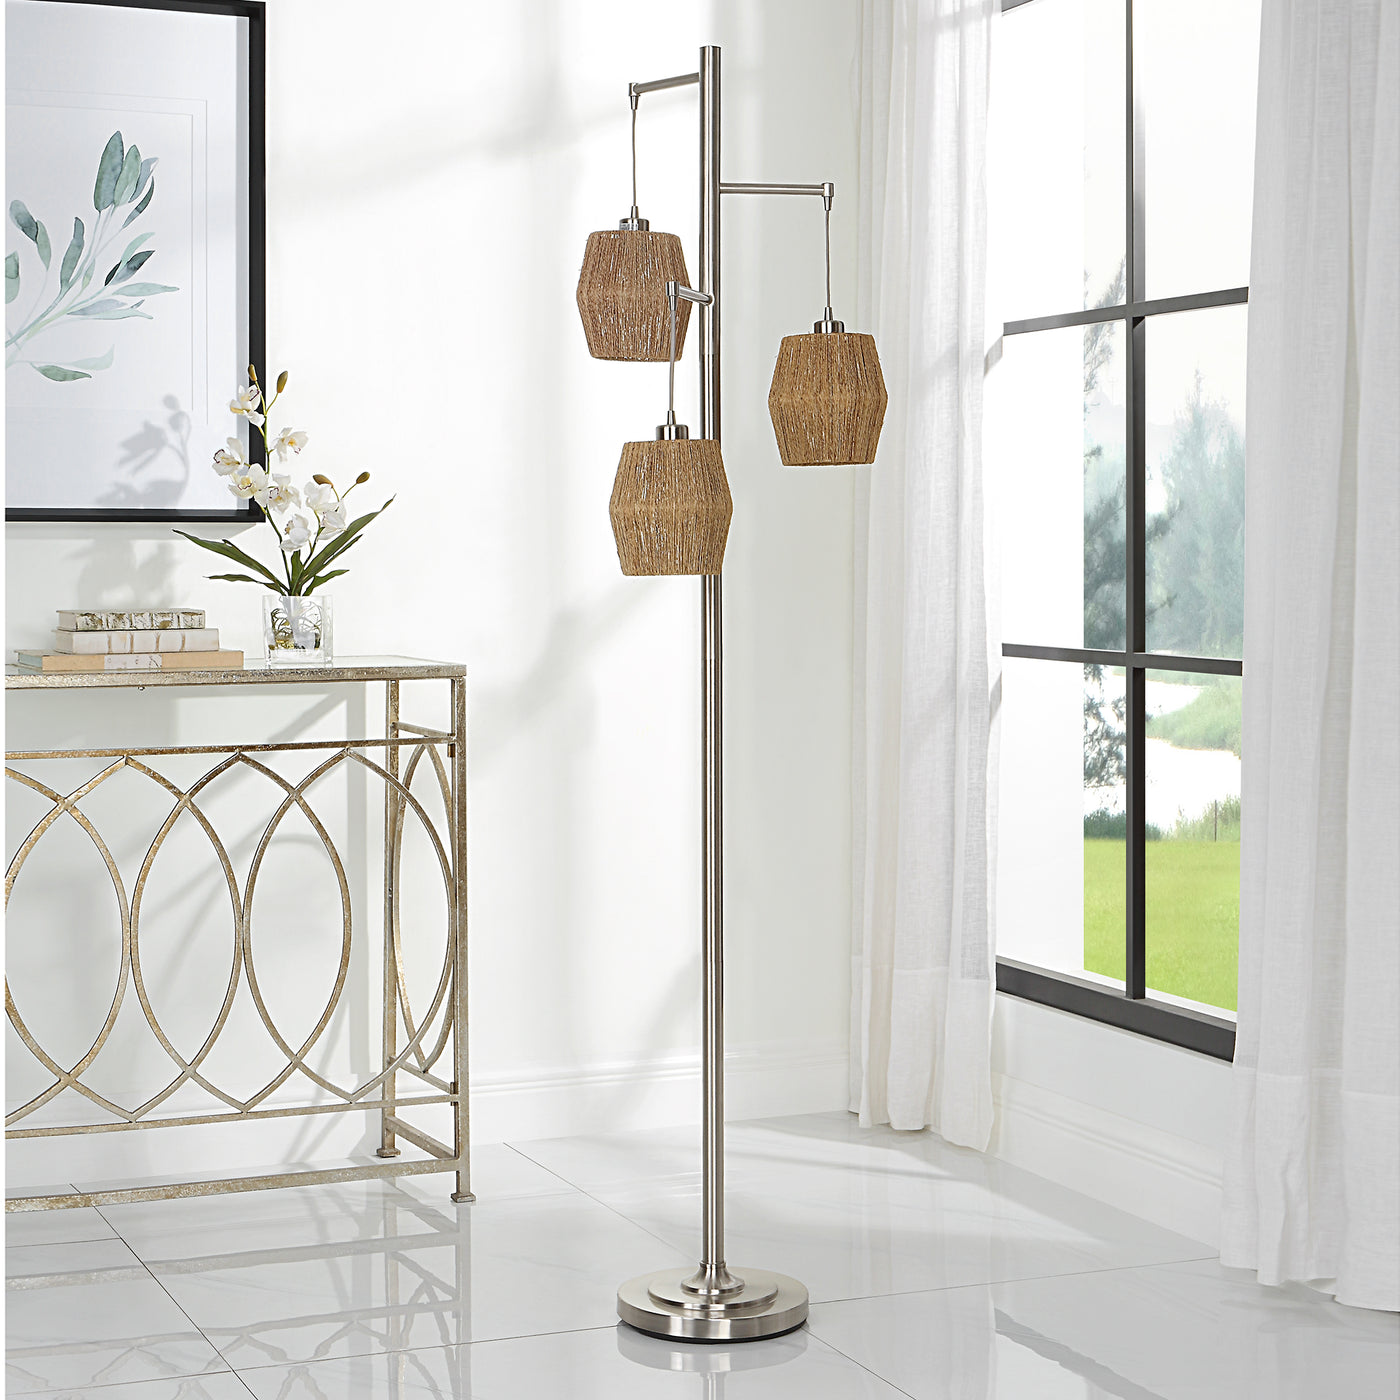 The Maldives - Pendant Floor Lamp With Brushed Nickel Stand and Woven Shades